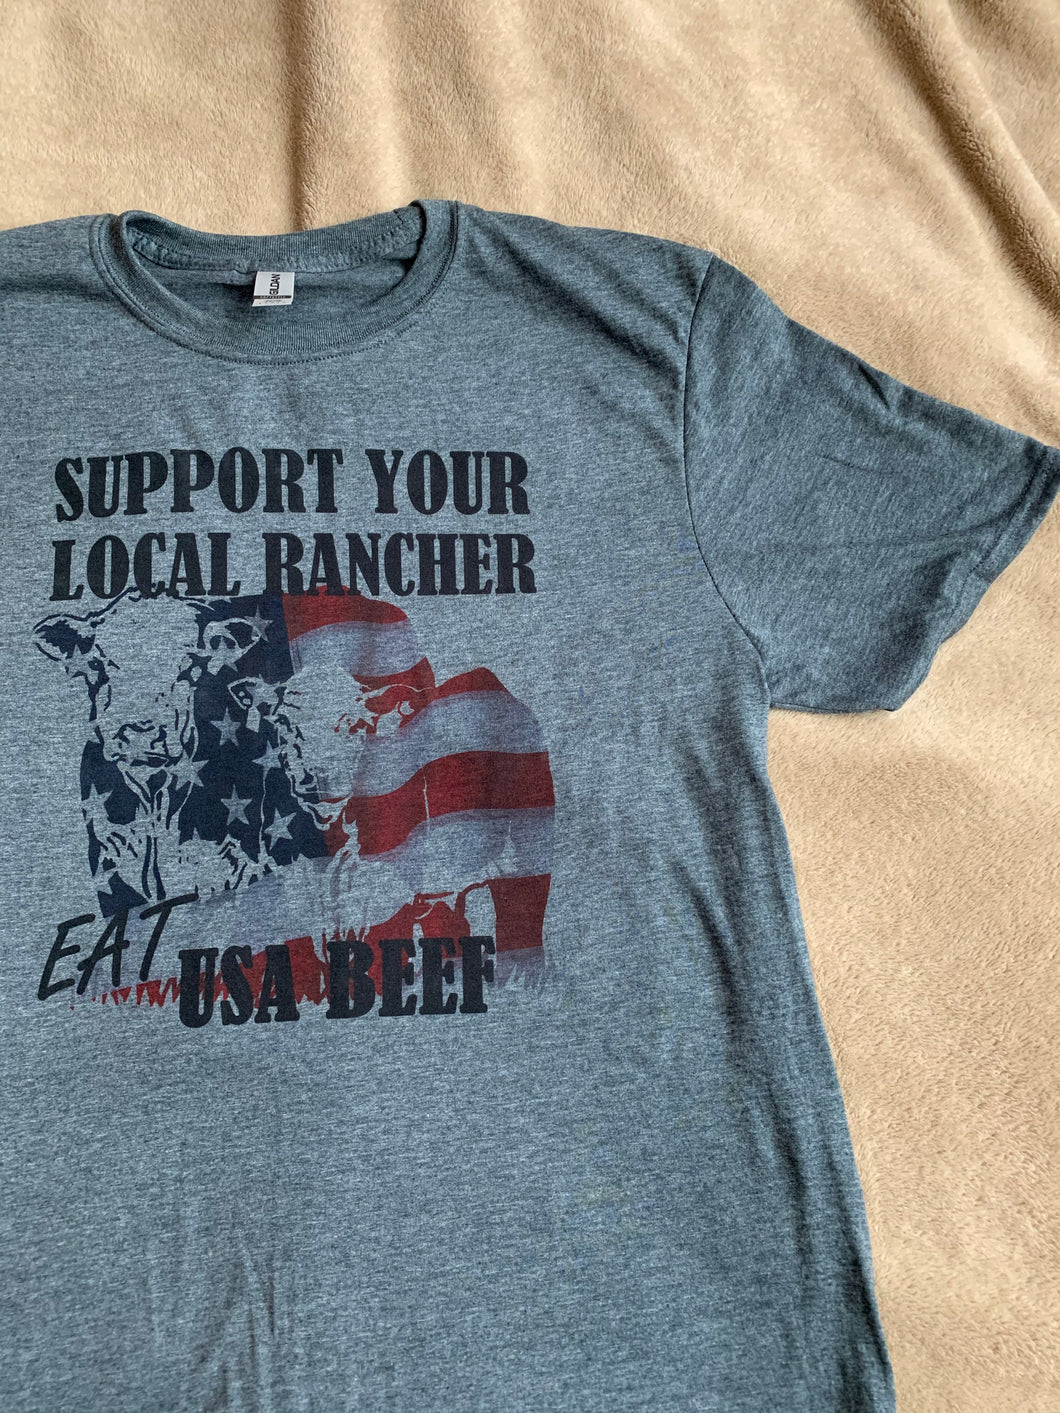 Support Ranching Eat USA Beef T Shirt